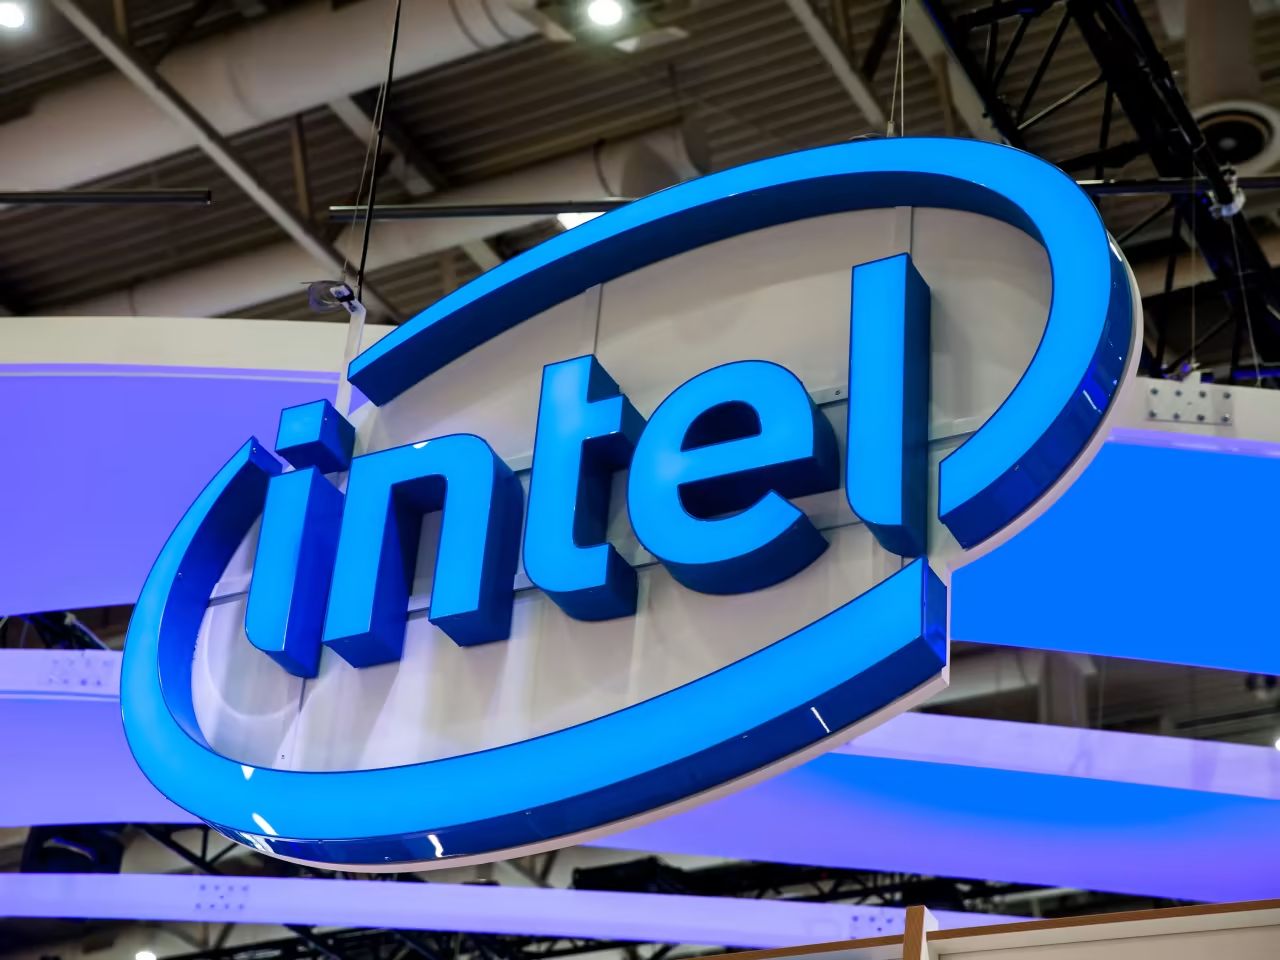 What Is Intel Trading At Today